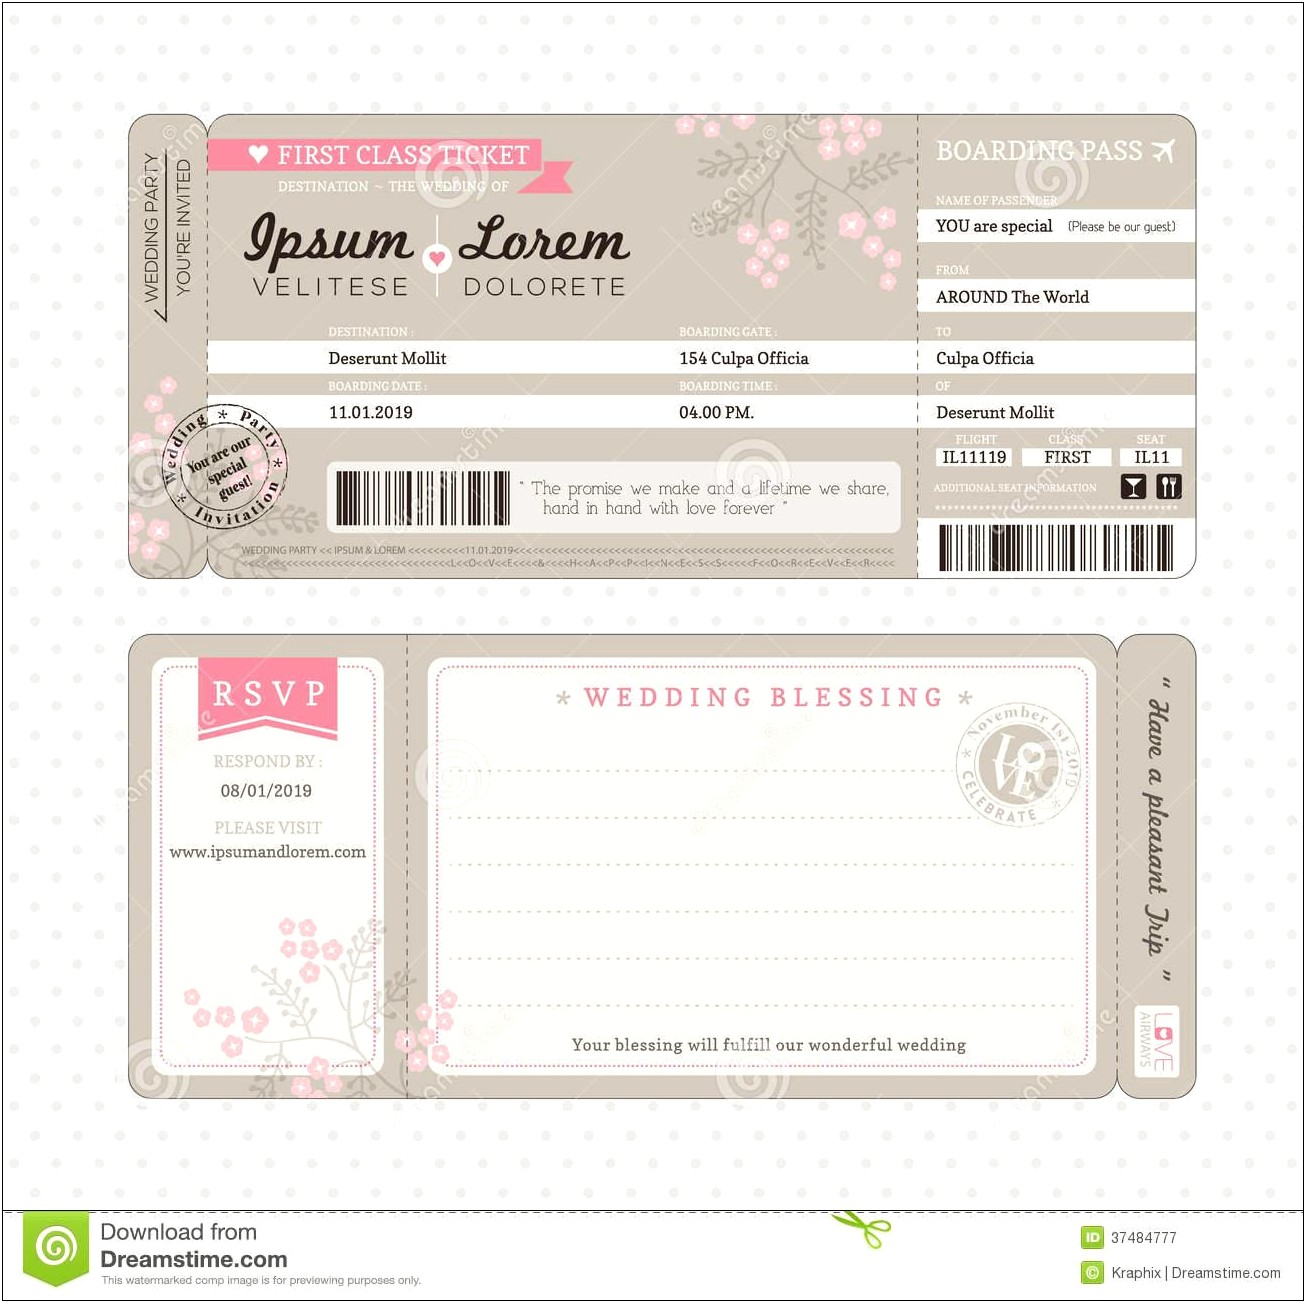 Free Birthday Party Ticket Invitations Template